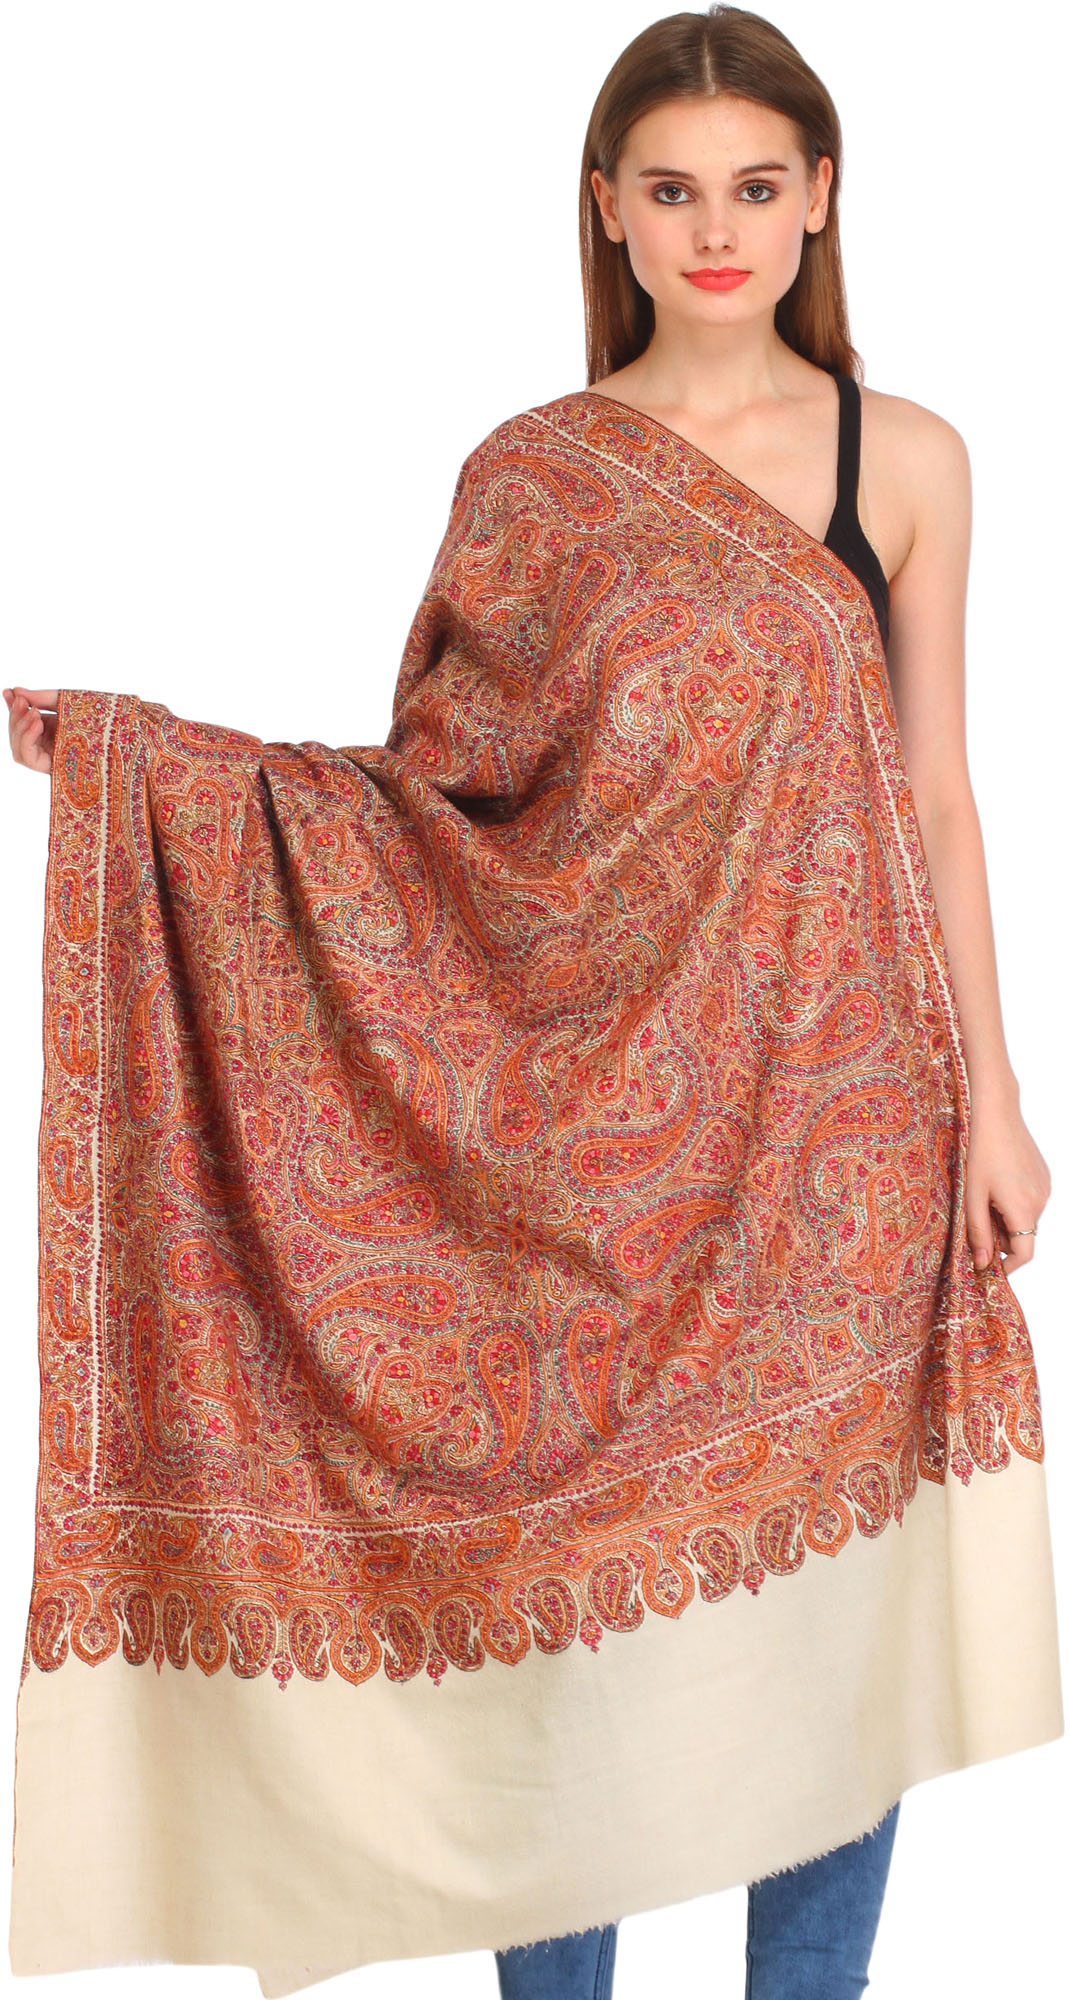 Off-White Kashmiri Pure Pashmina Shawl with Hand-Embroidered Forest of Paisleys